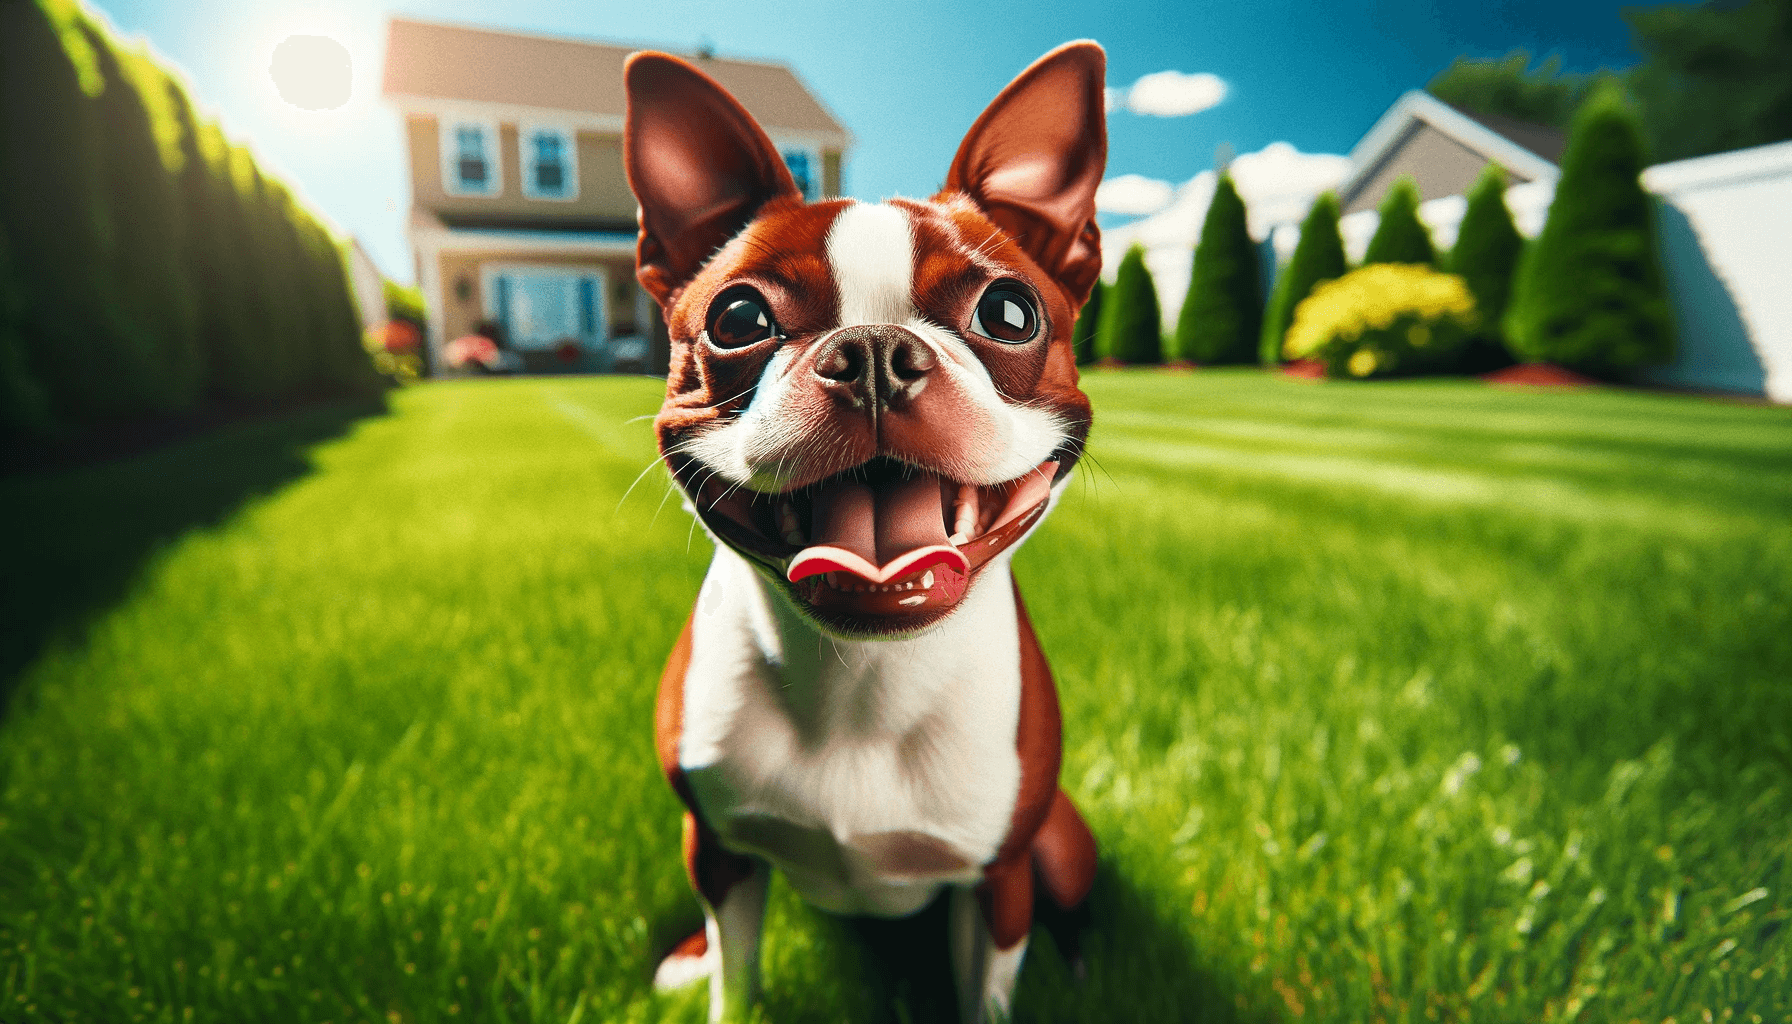 Red Boston Terrier Sitting Upright on a Vibrant Green Lawn